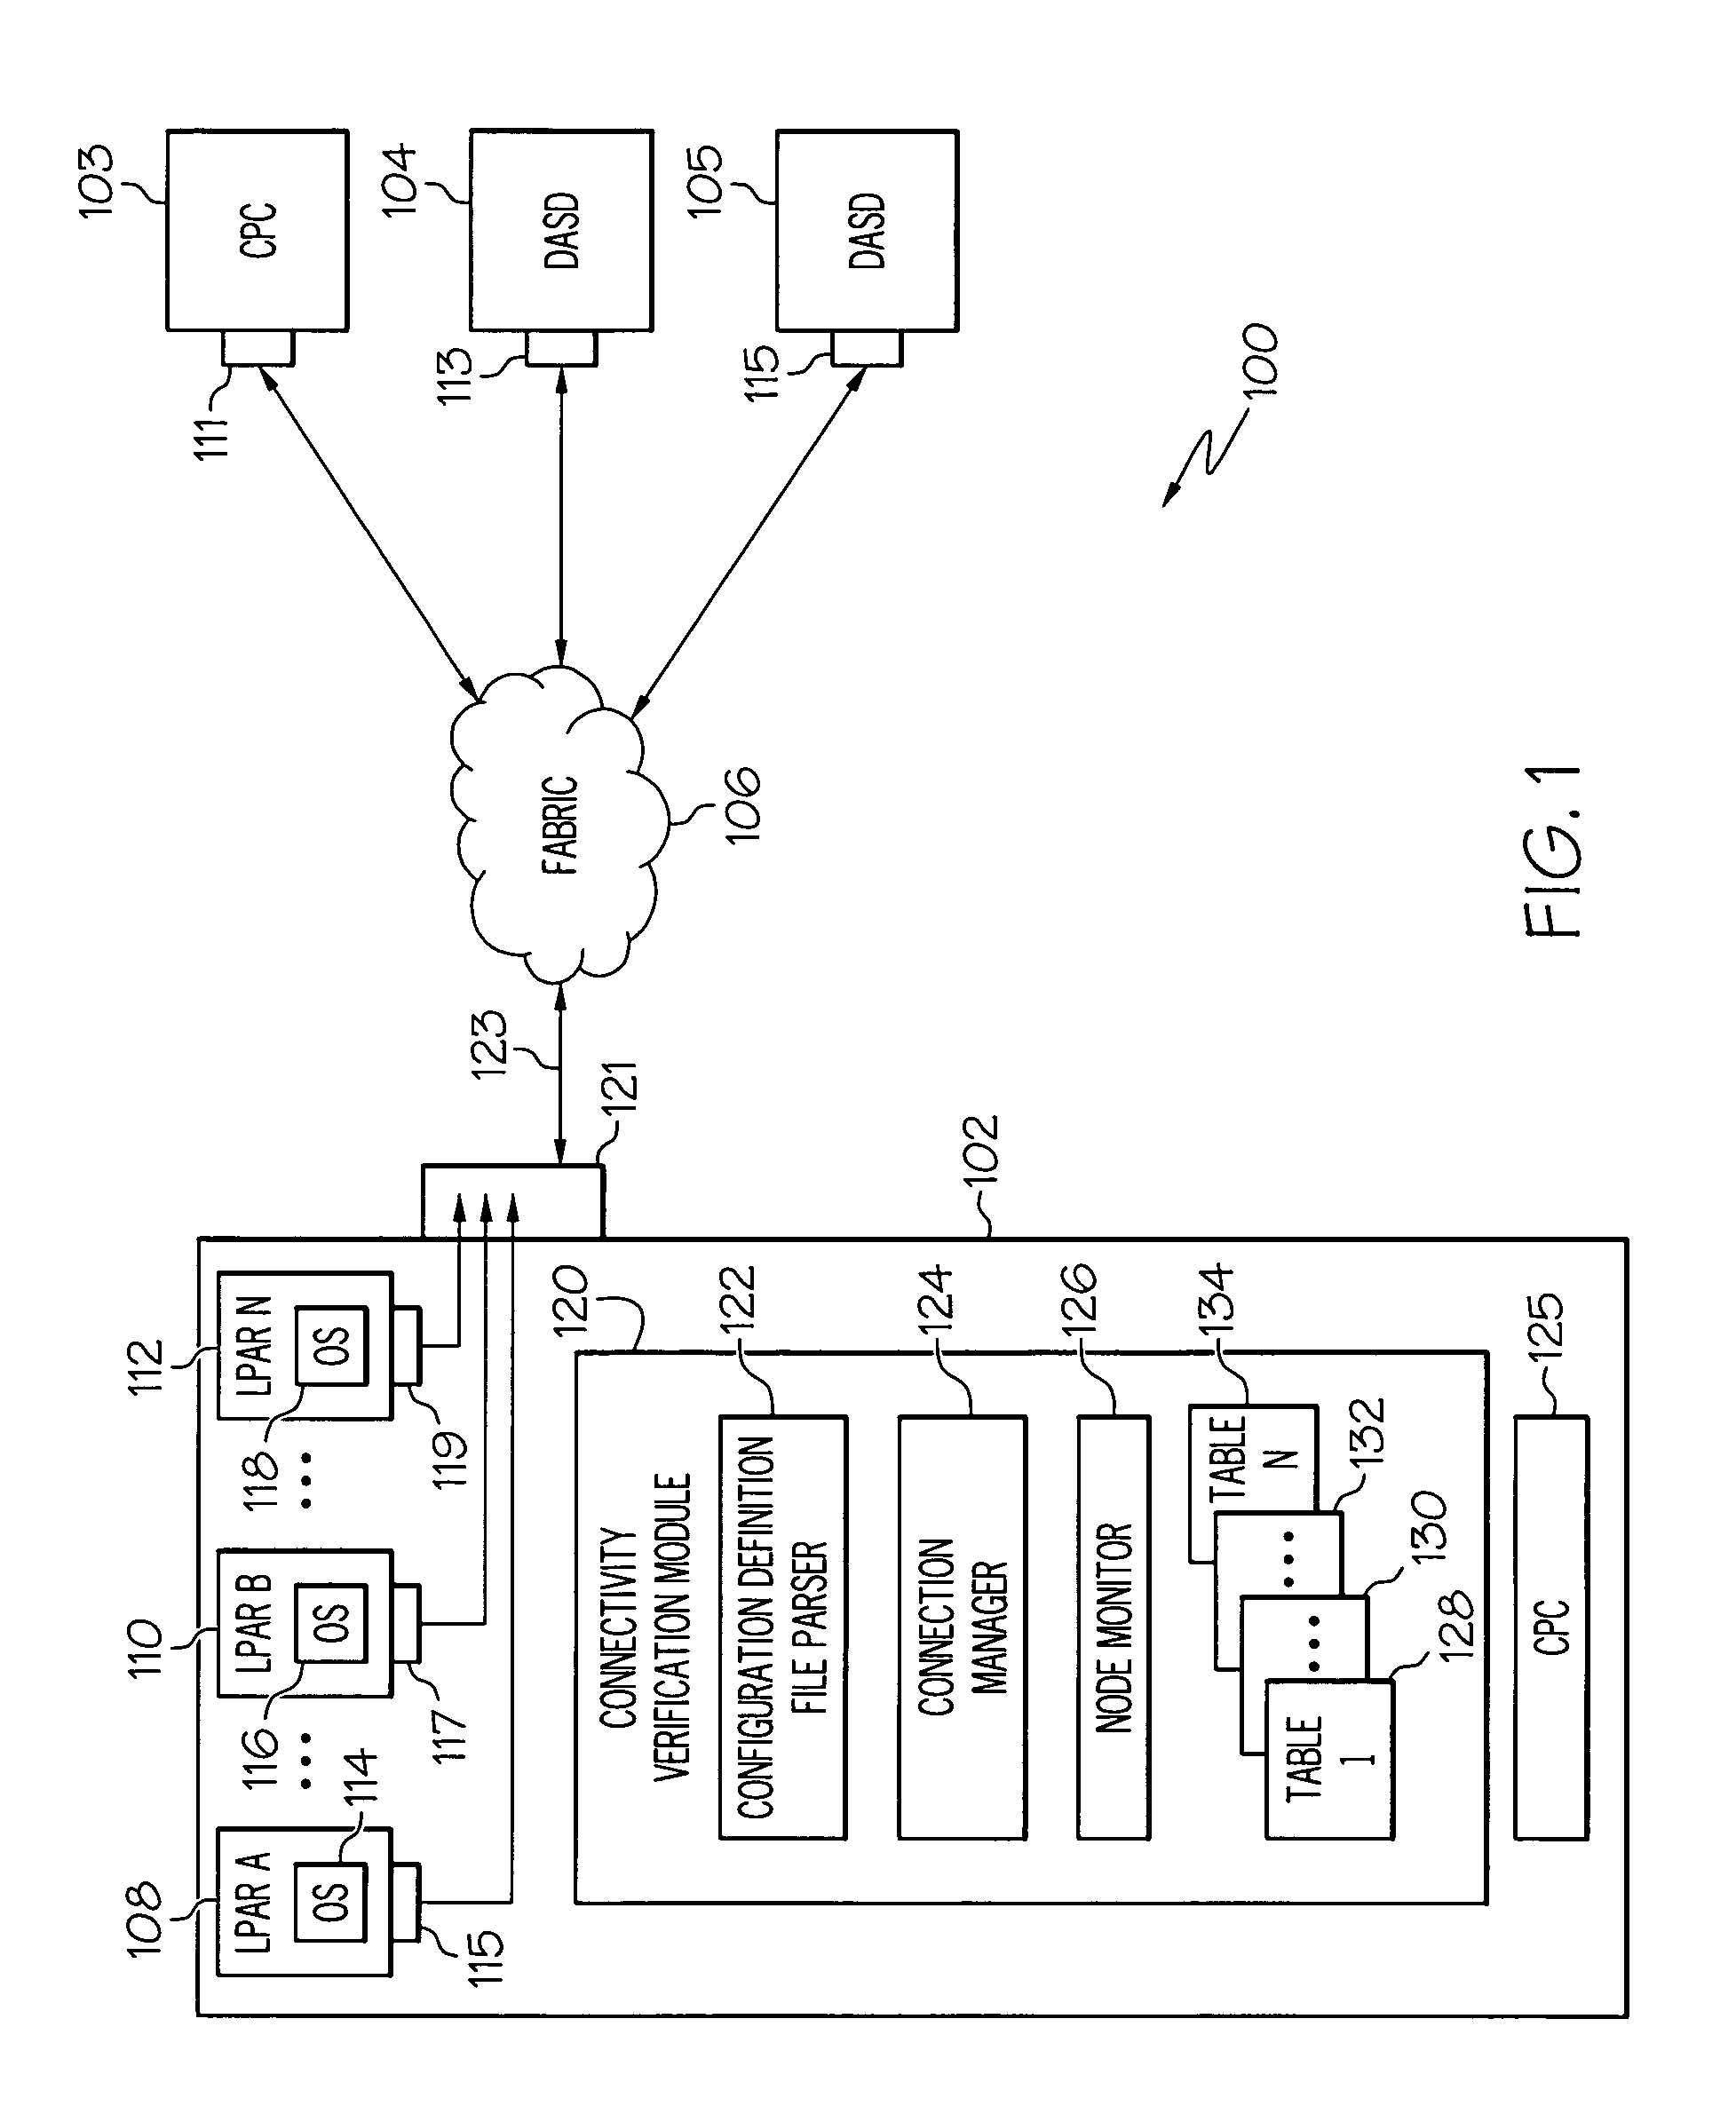 Logical to physical connectivity verification in a predefined networking environment